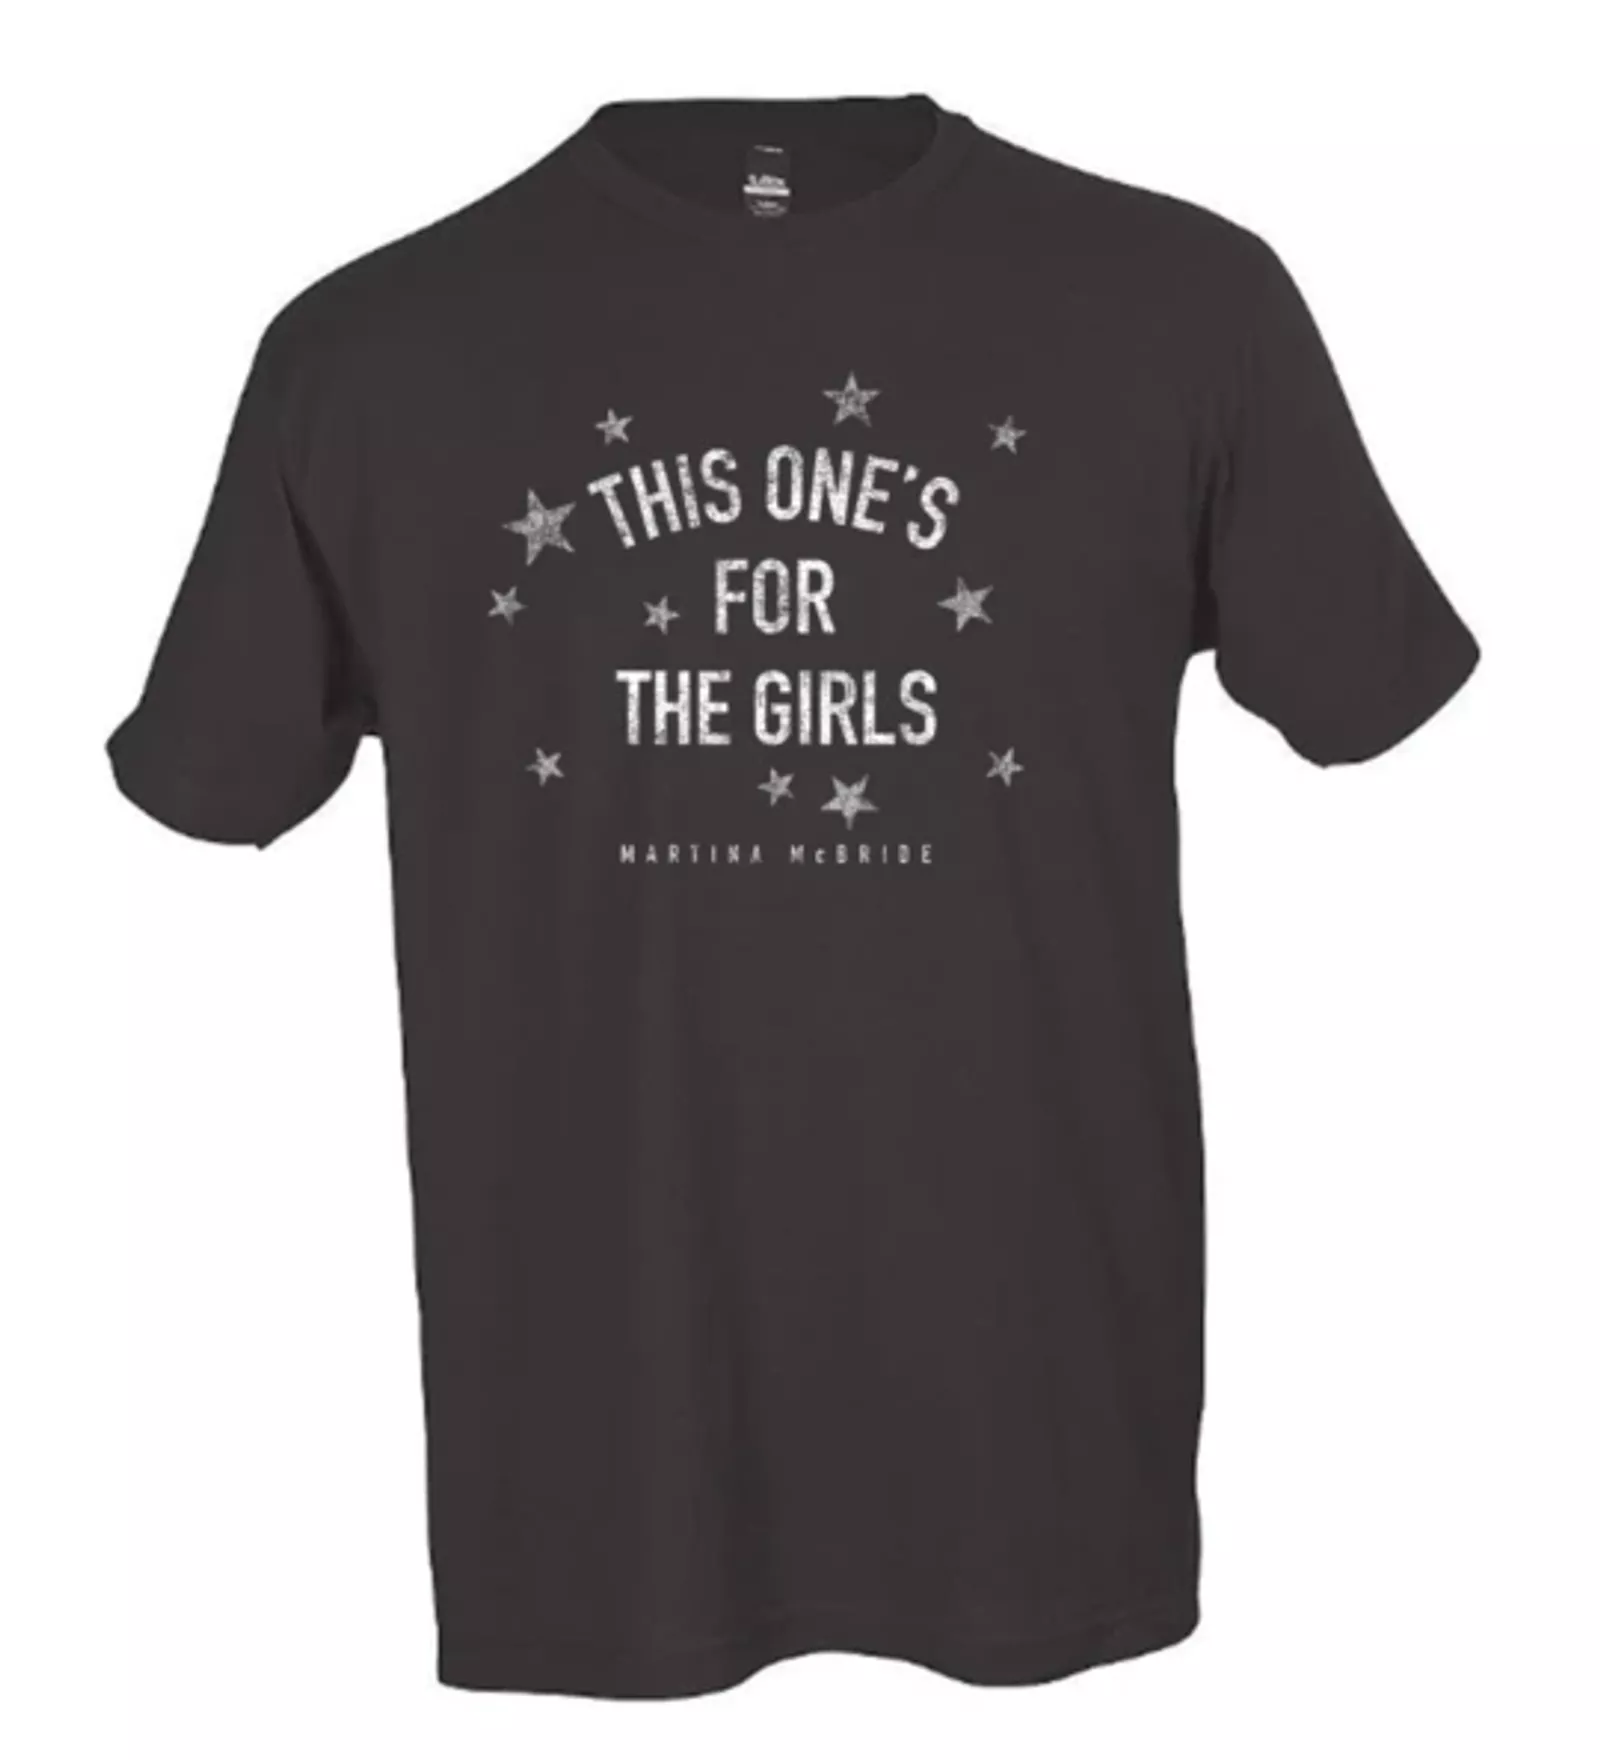 This One's For the Girls Tee